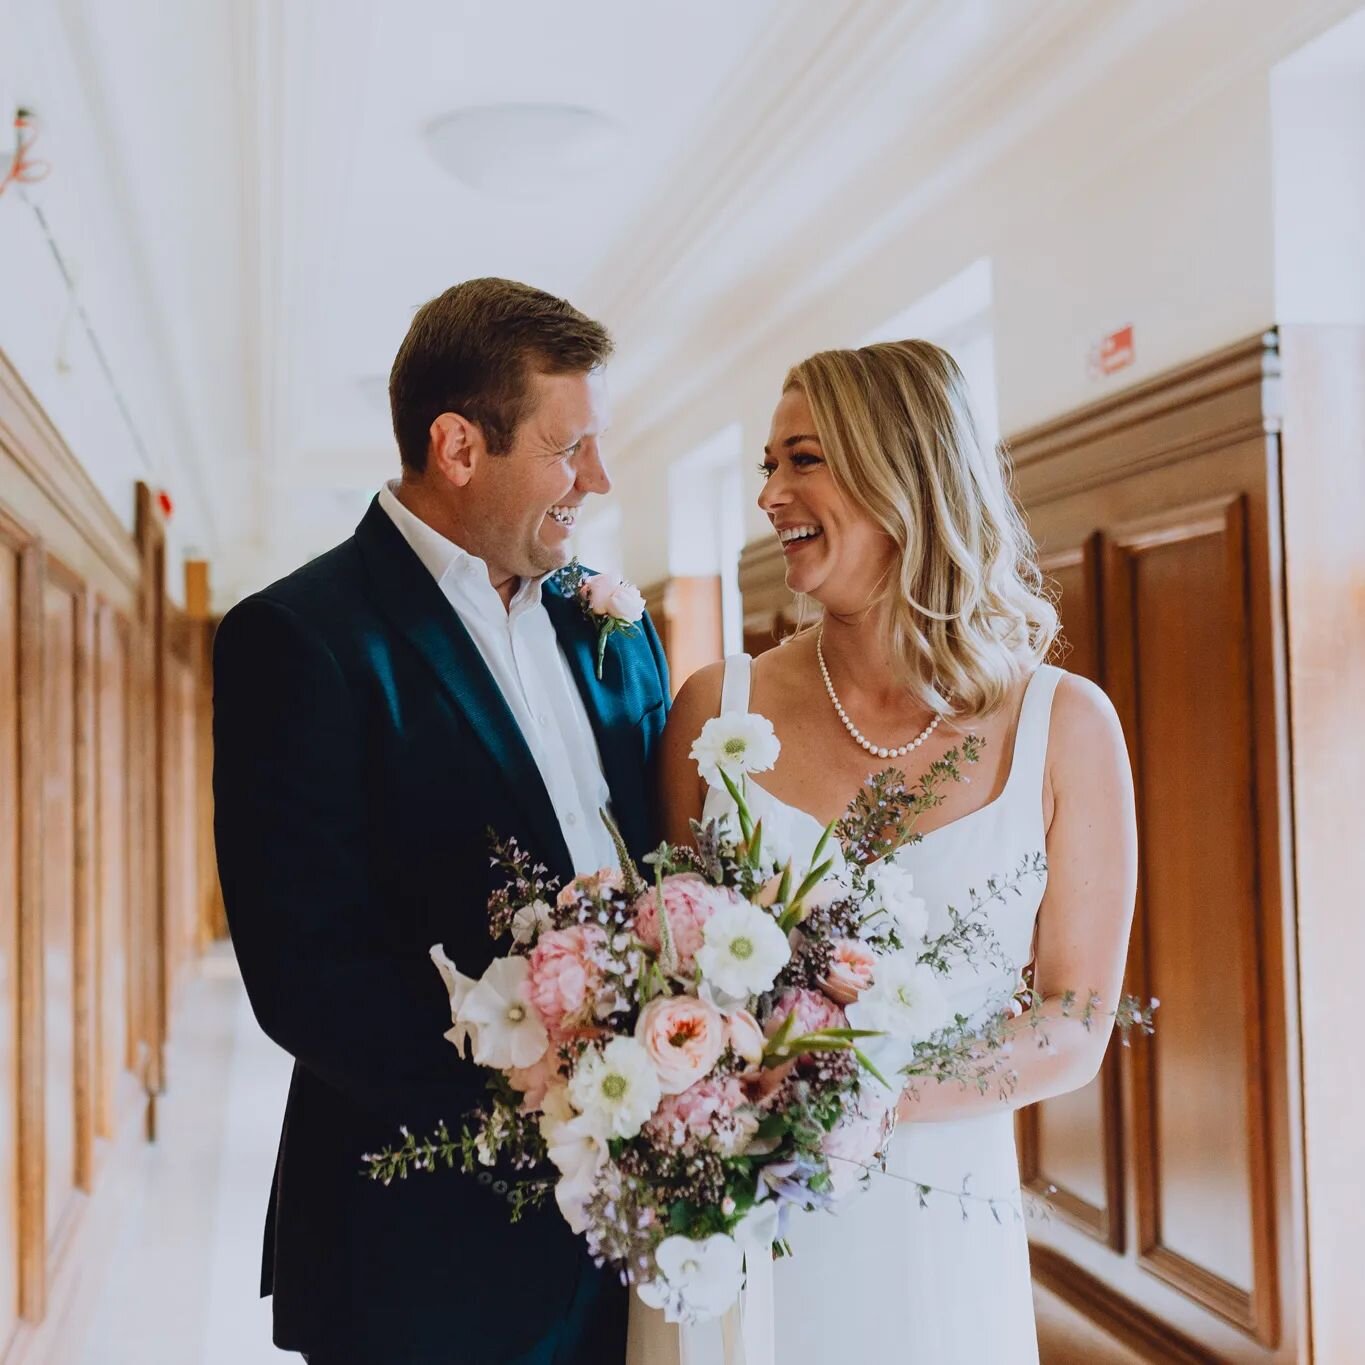 ✨ INTIMATE WEDDINGS ✨

On that very wet weekend in July (&quot;which one!?&quot; I hear all the wedding suppliers cry! 😂) Georgina and Edward got married at Wandsworth Town Hall in a lovely intimate Ceremony with just their closest family and friend